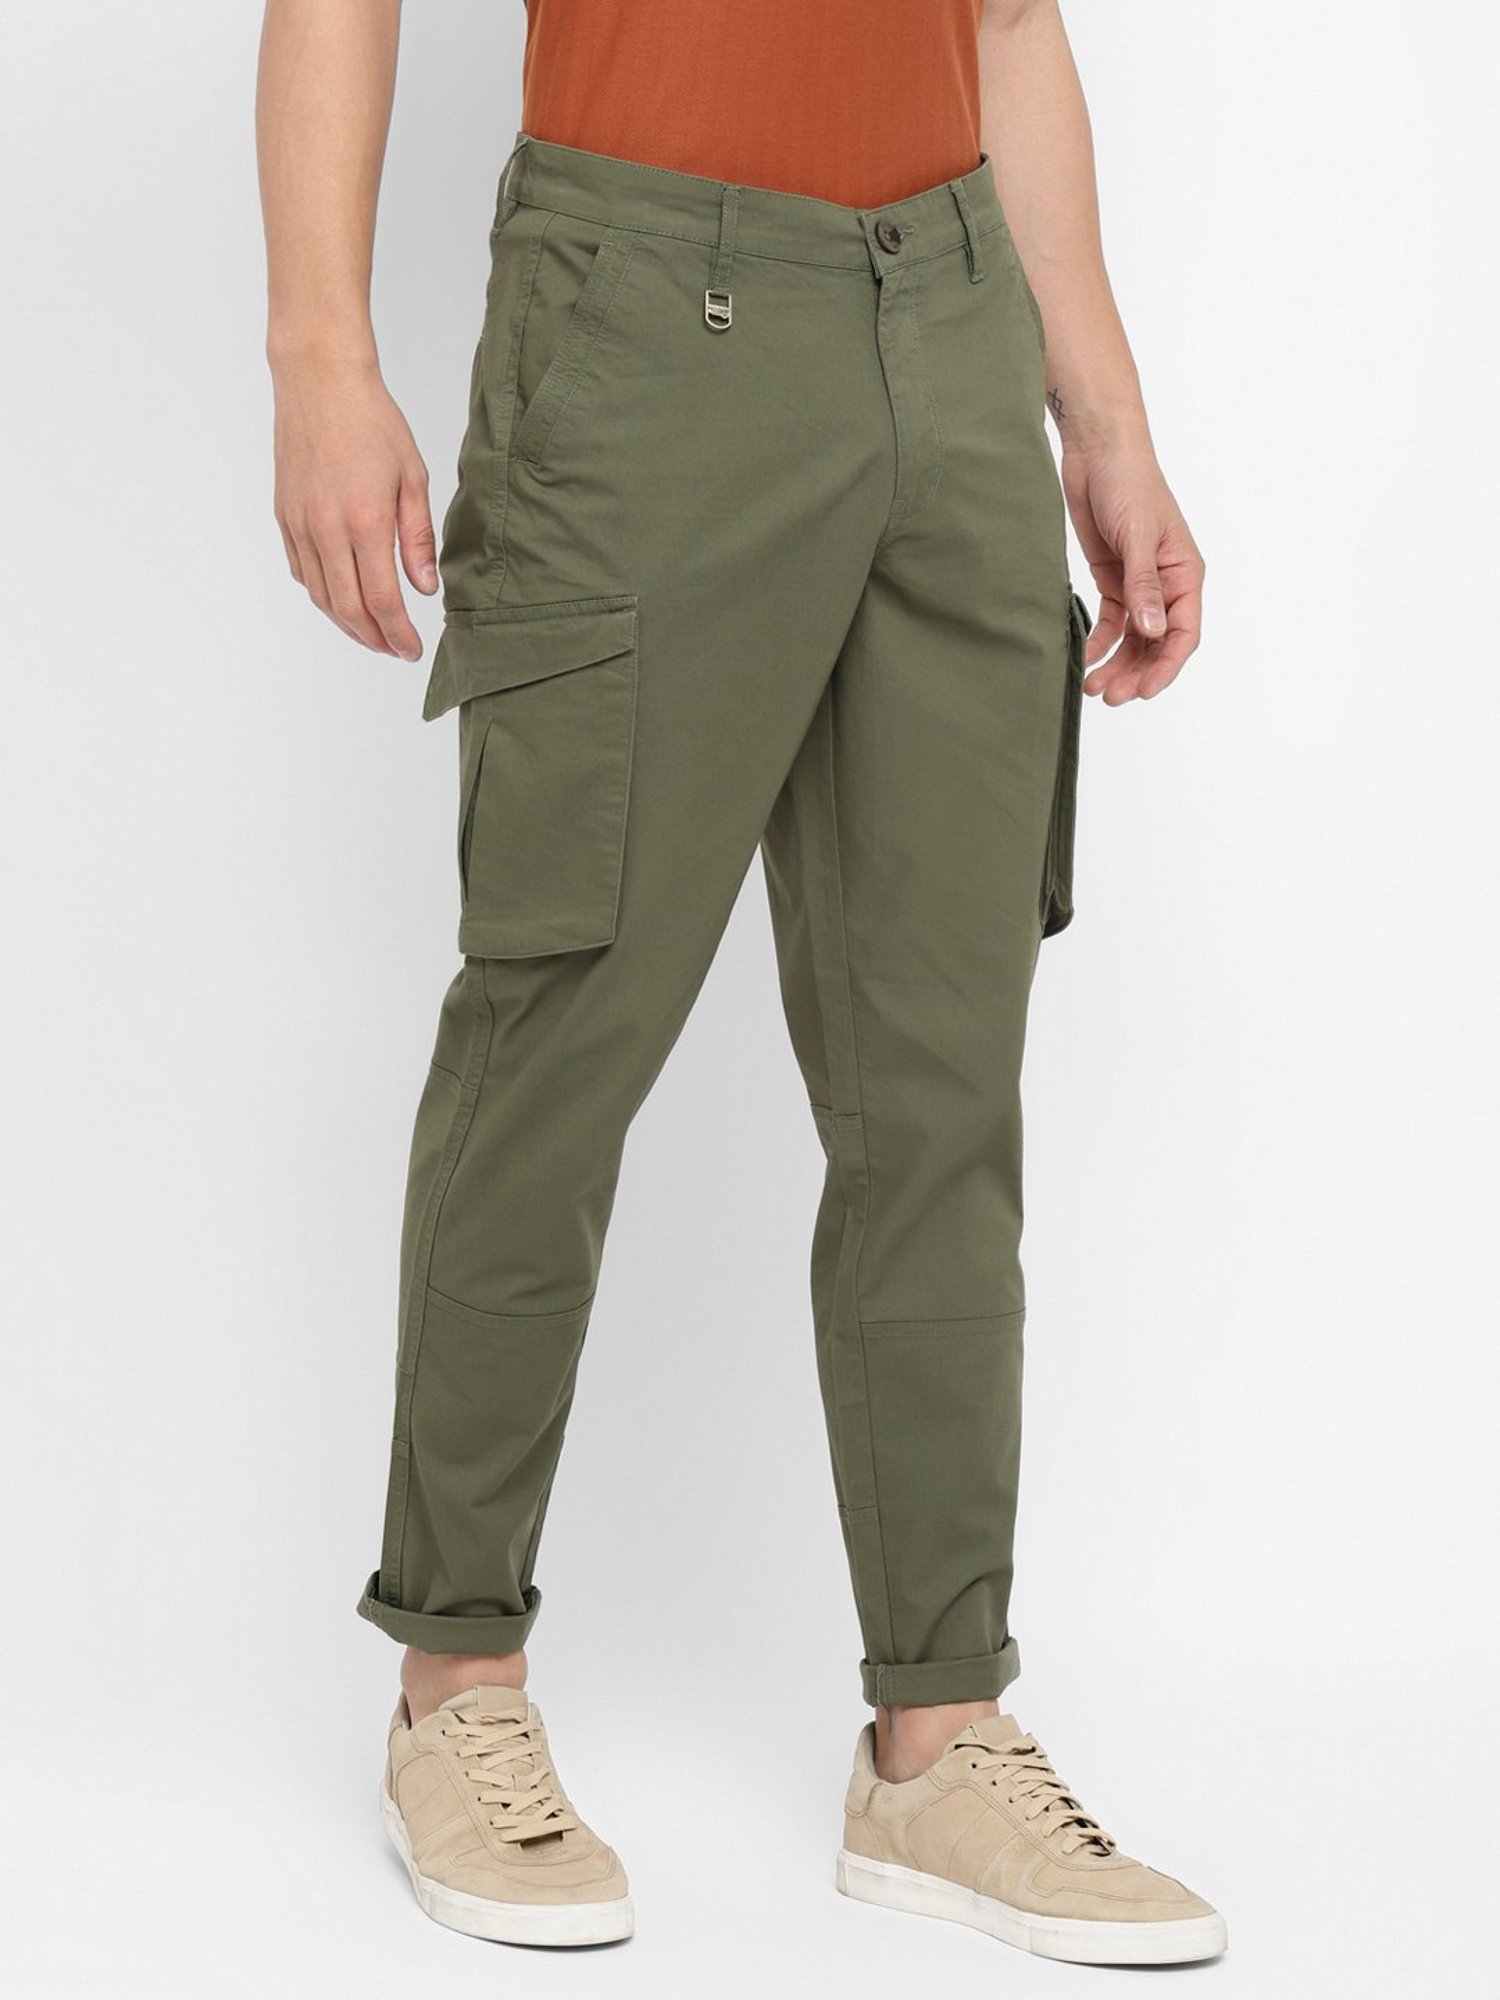 Buy Od cargo pant olive 30 Online at Best Prices in India  JioMart